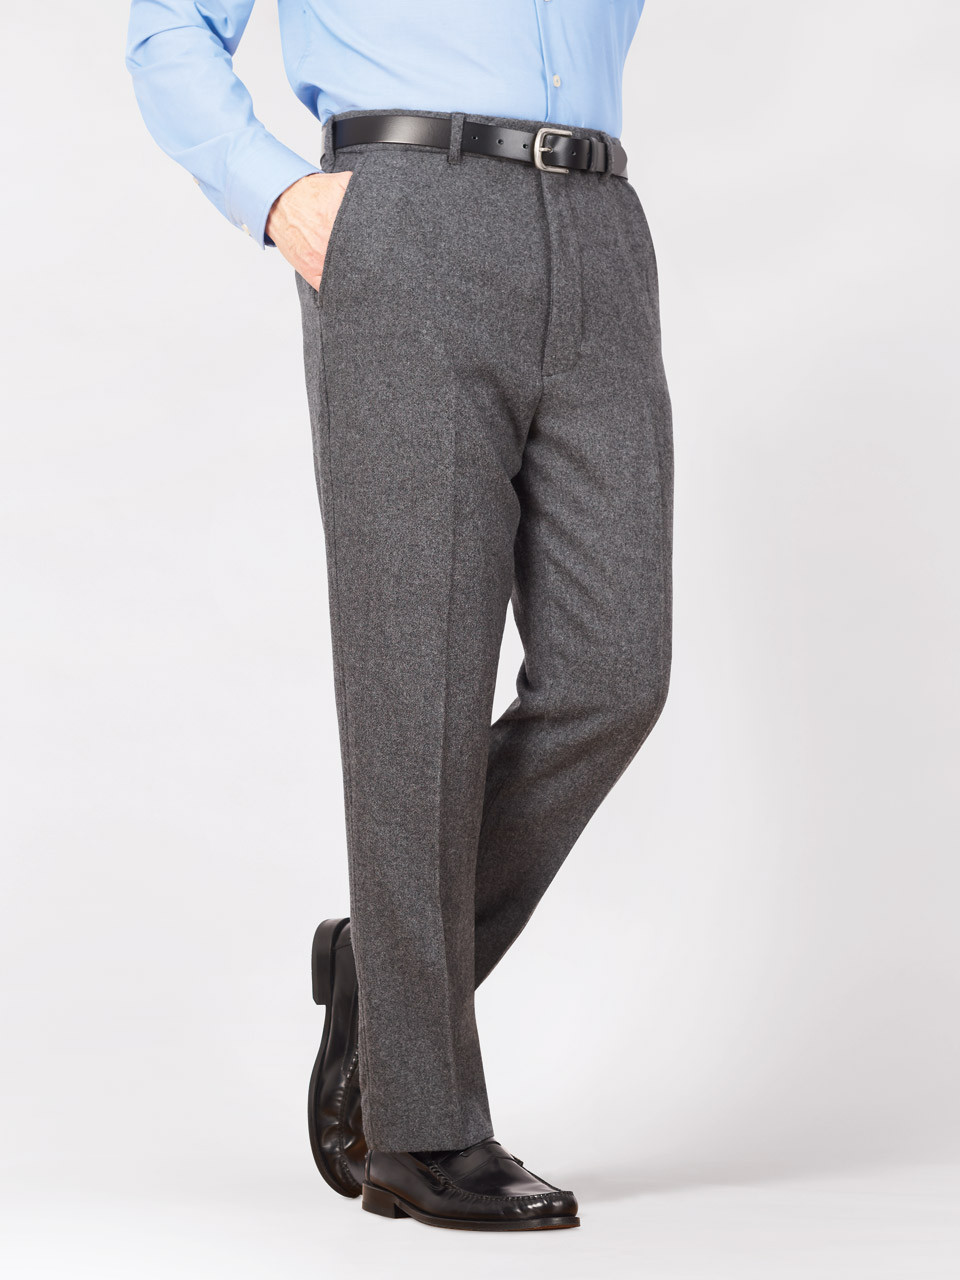 Ultimate Guide To Gray Flannel Trousers  Why Men Need Grey Flannel Pants   YouTube